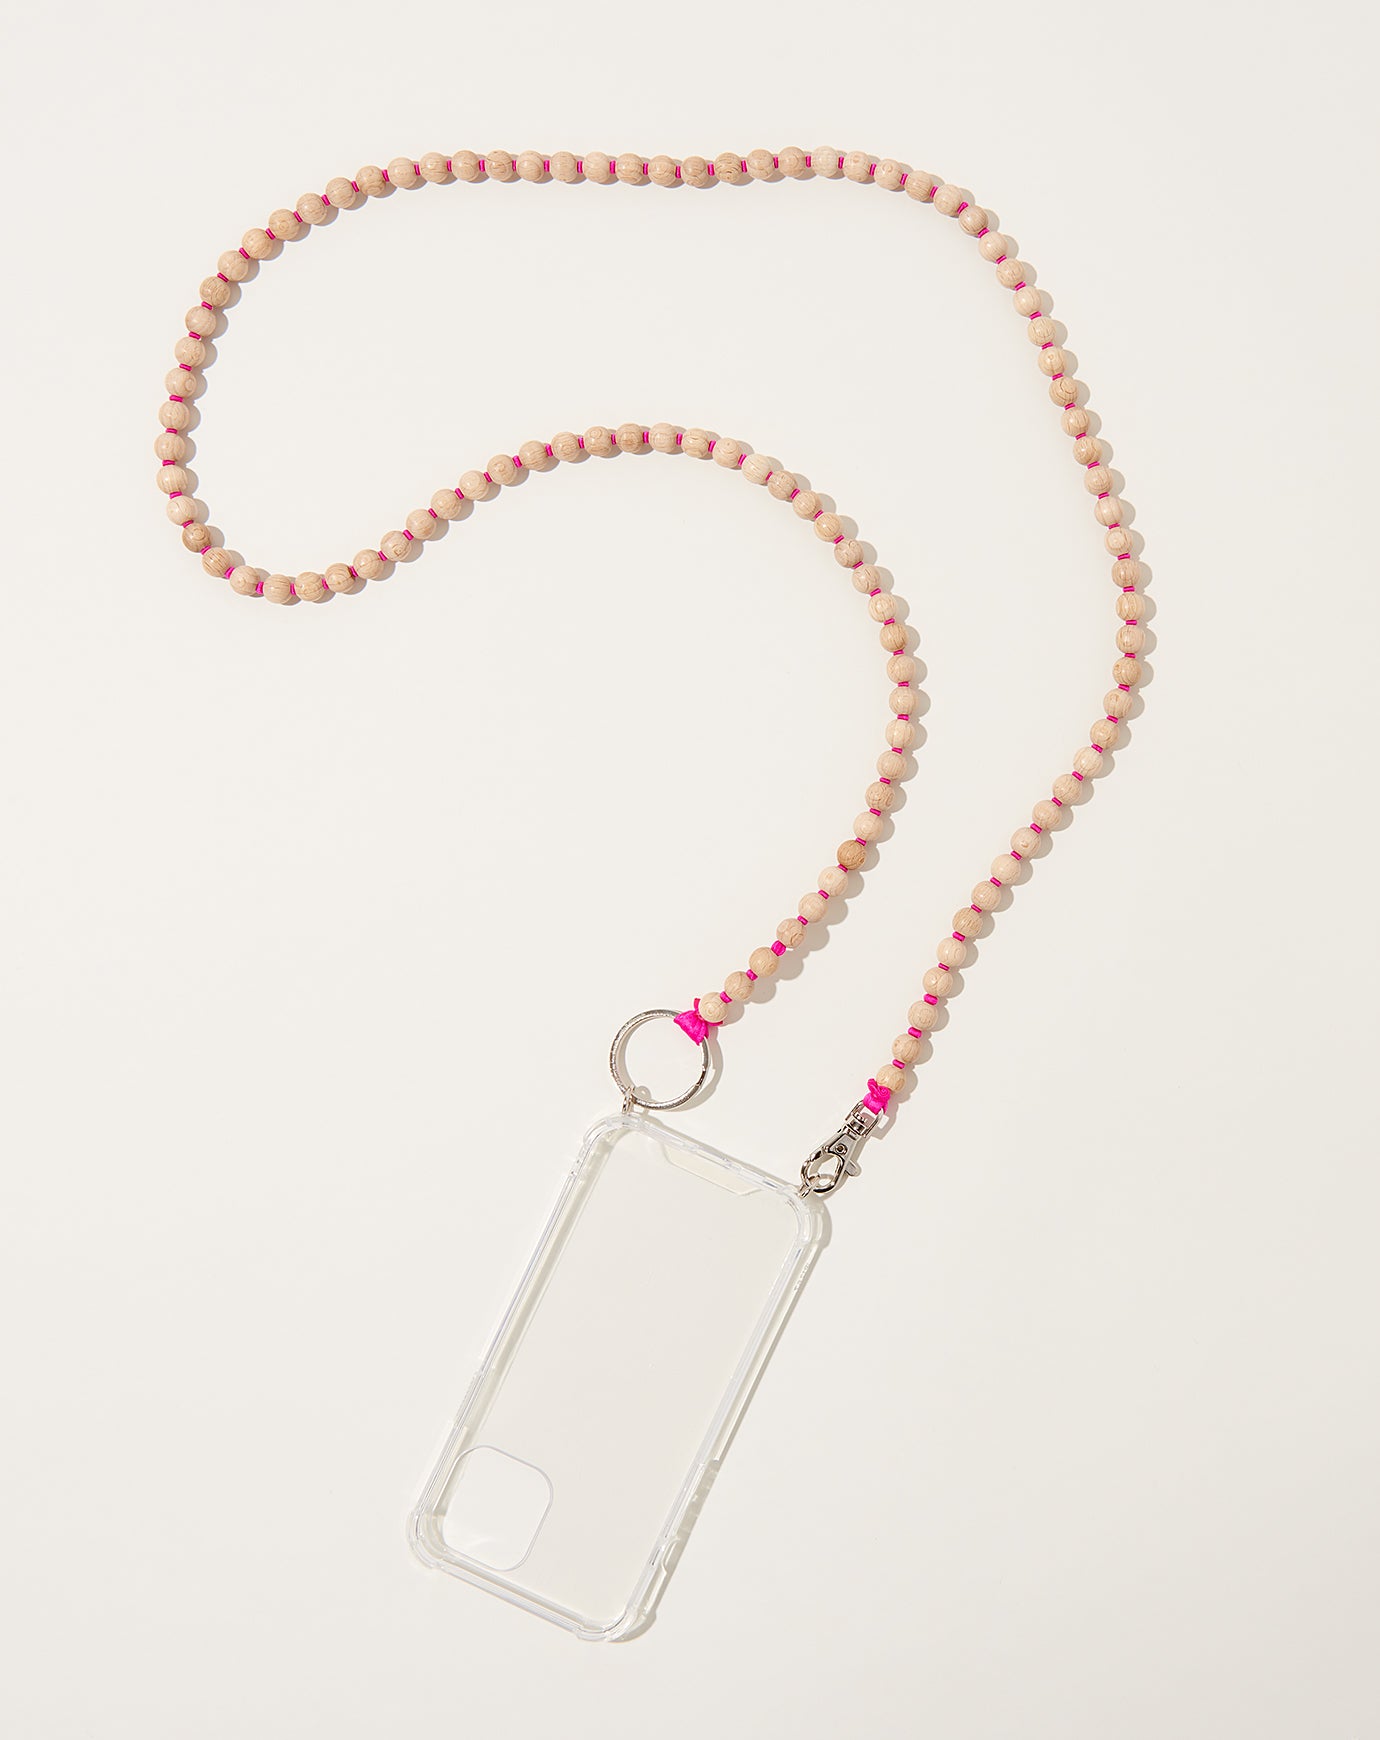 Ina Seifart Handykette iPhone Necklace in Natural on Pink